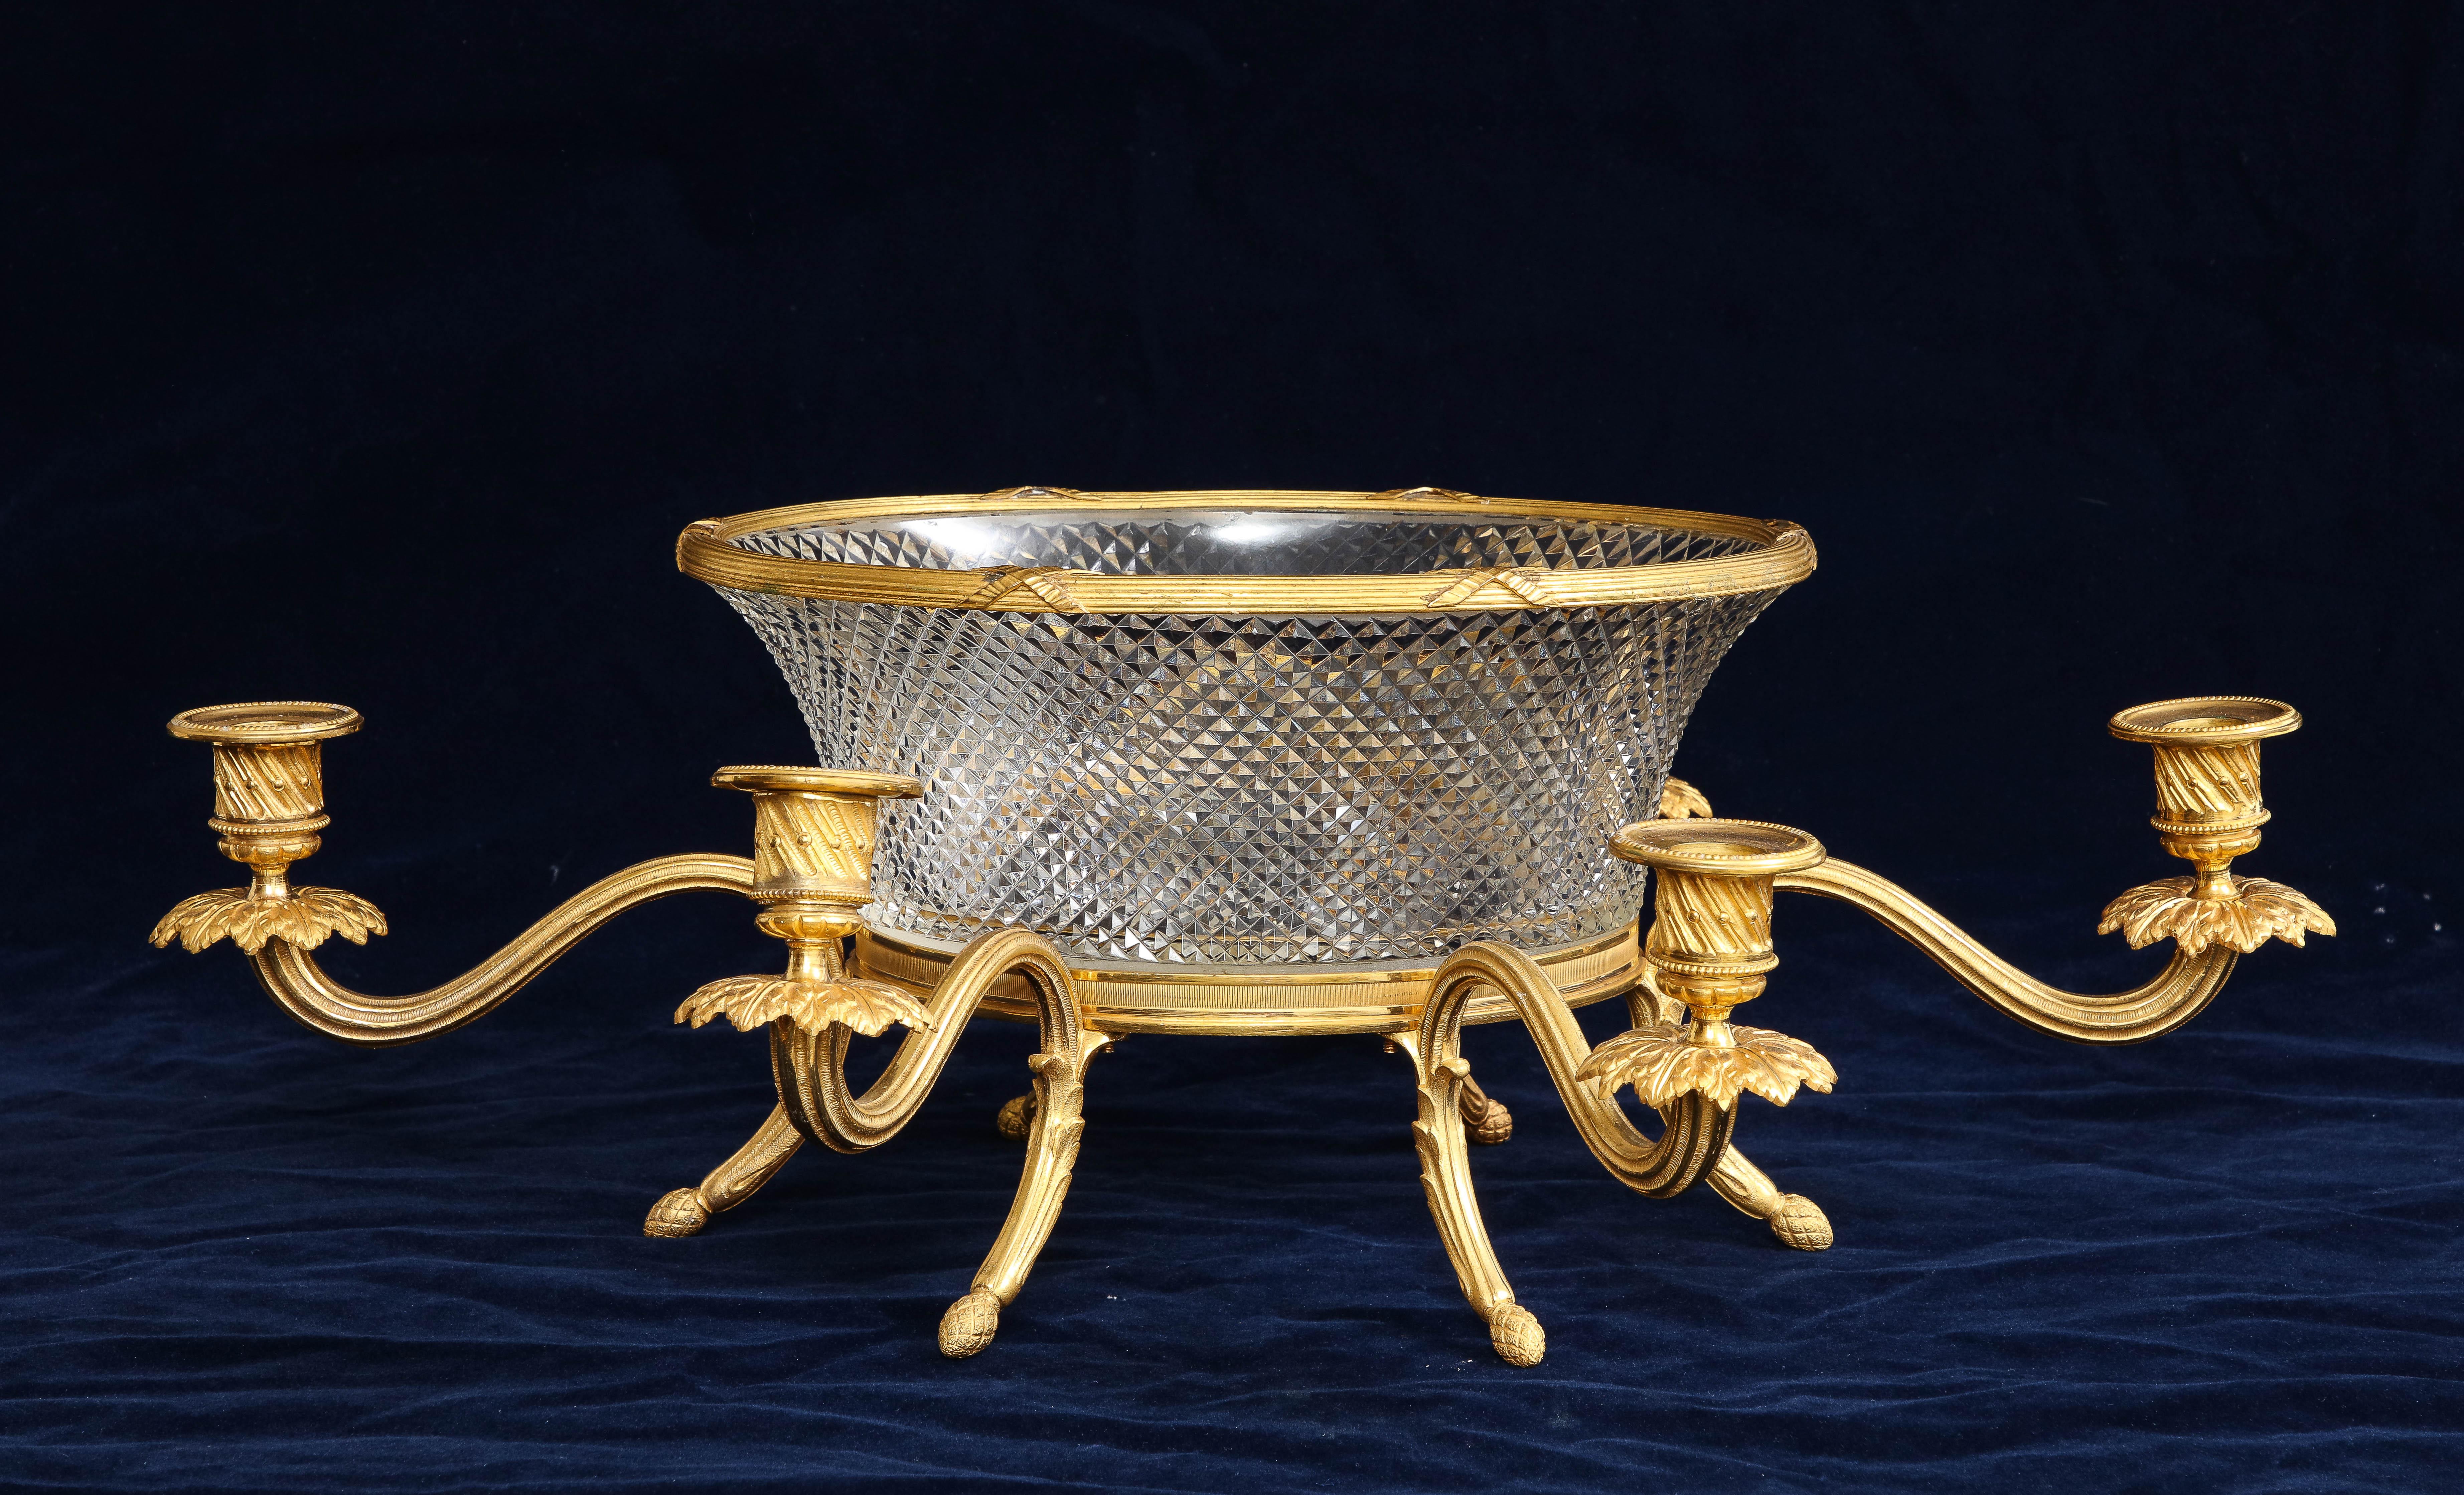 An unusual 19th century French ormolu mounted crystal centerpiece or candelabra, the crystal attributed to Baccarat. The crystal bowl has a beautiful prismic pattern which has been handcut. The crystal is further mounted on a gorgeous hand-chased